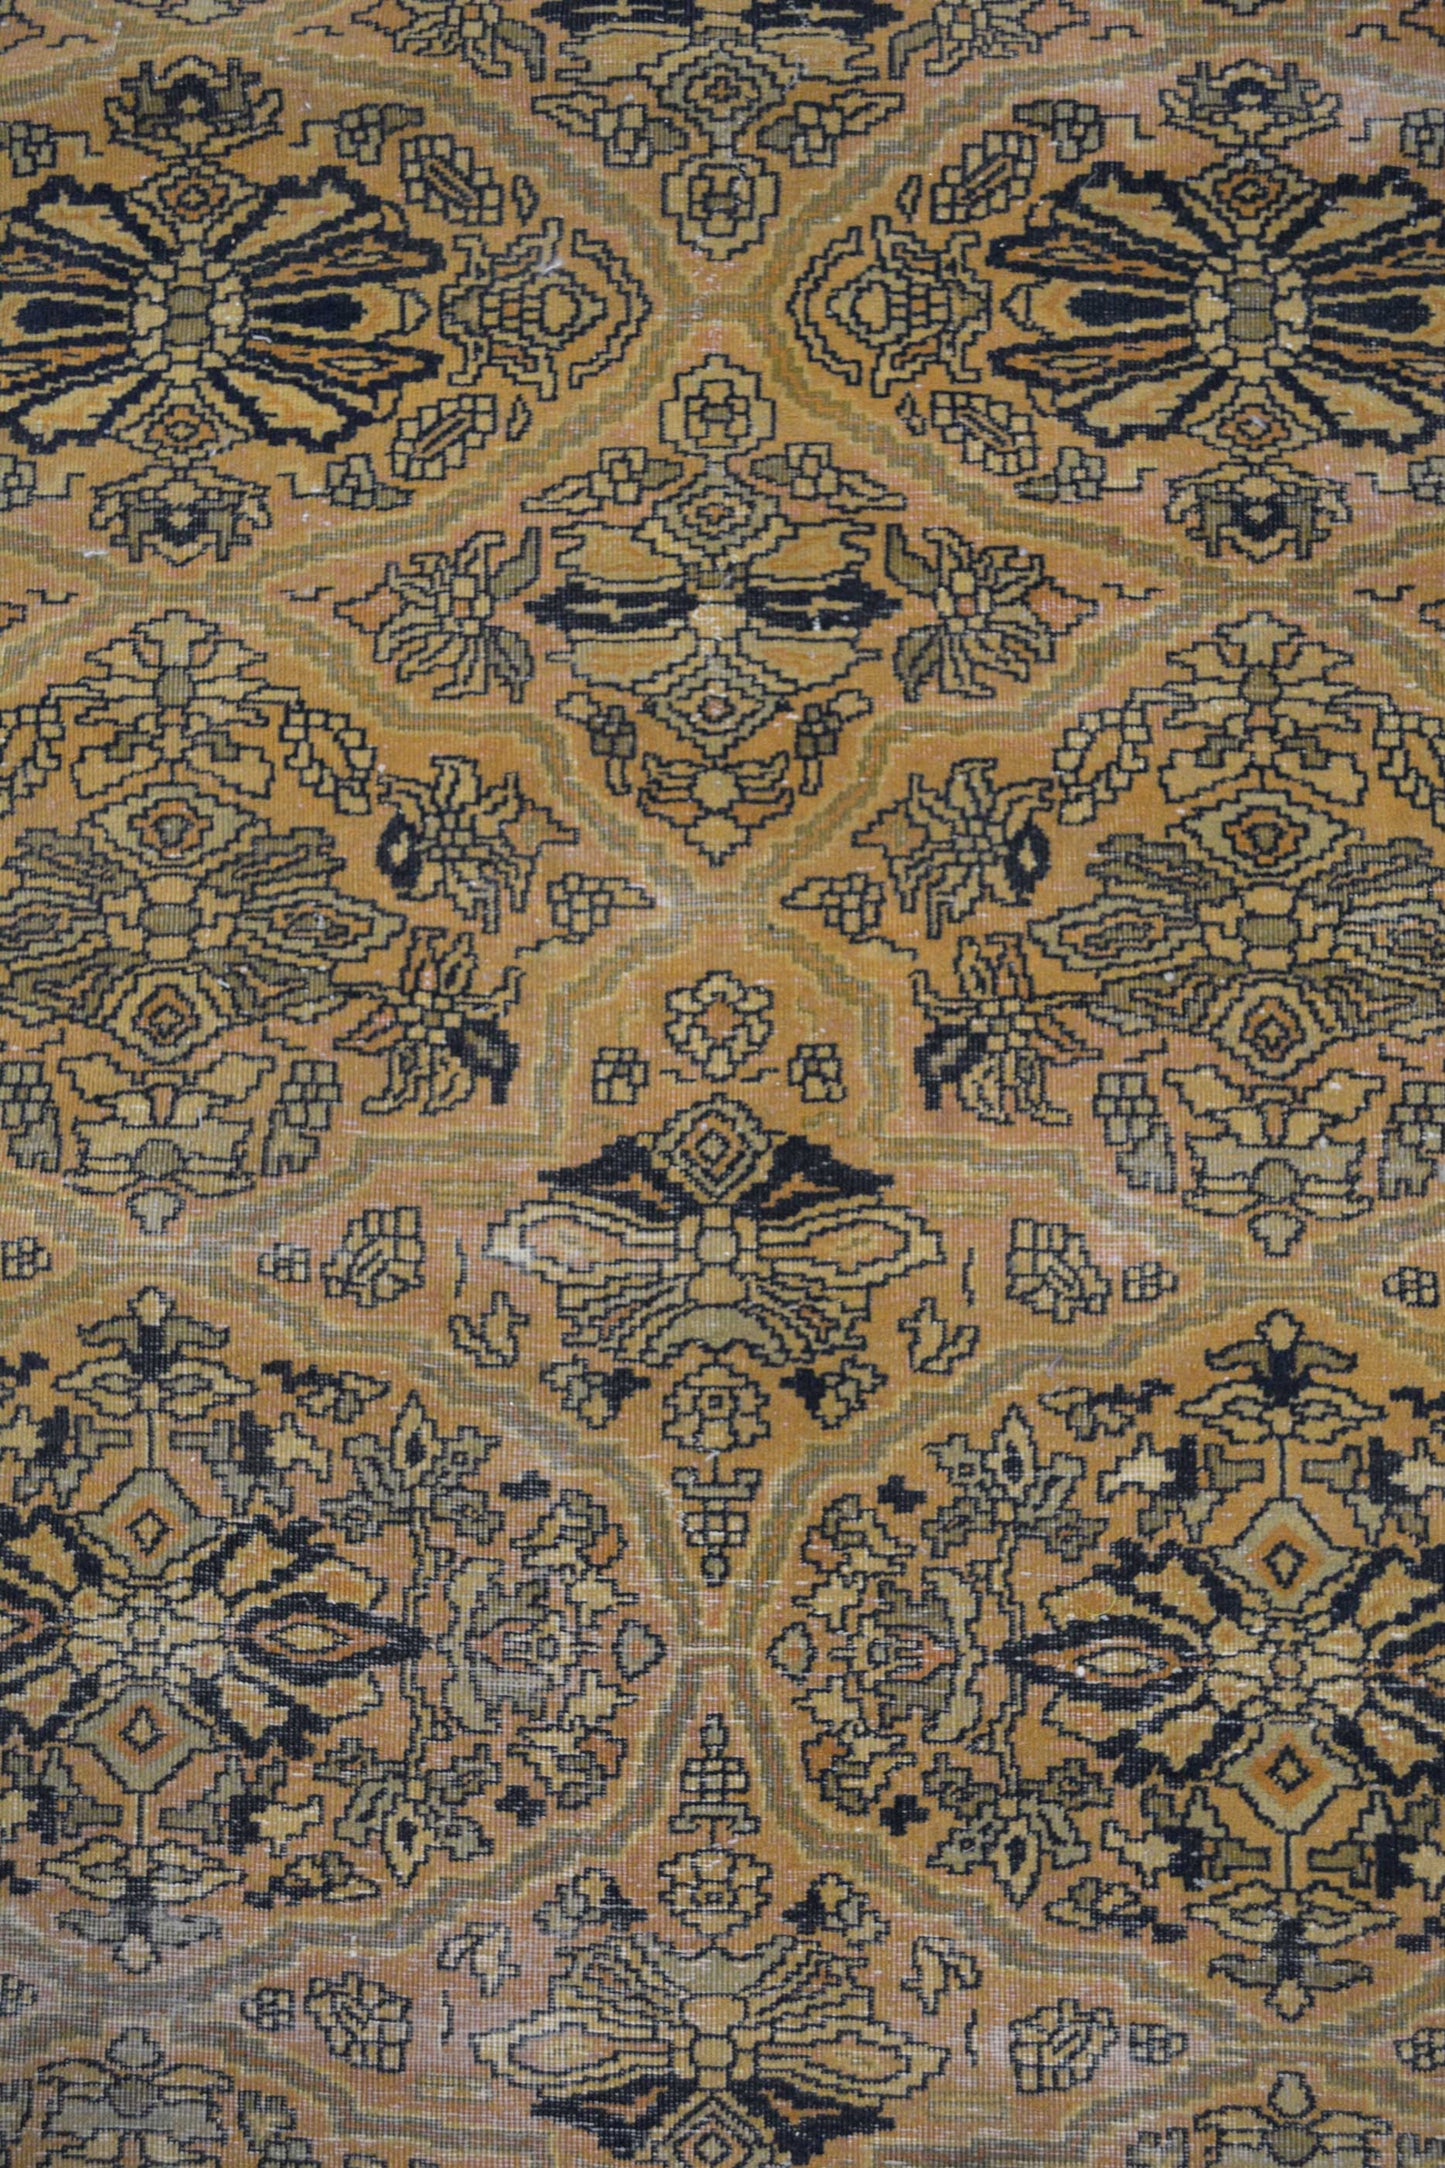 In the carpet's center, the pattern renders different abstract versions of a sunflower.